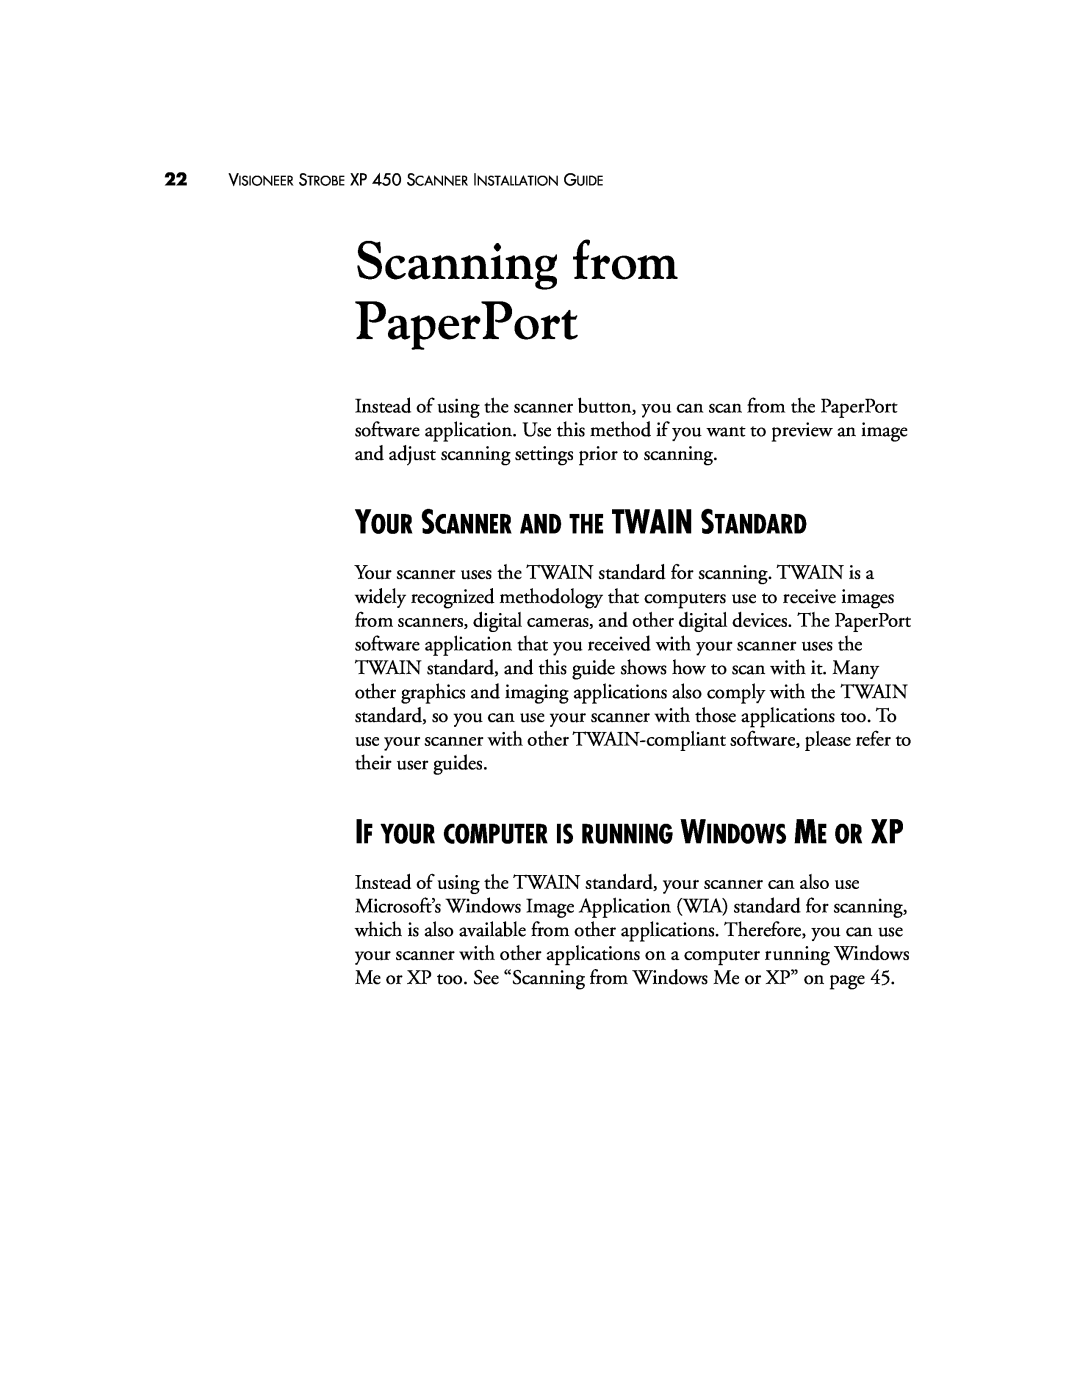 Visioneer XP 450 manual Scanning from PaperPort, Your Scanner And The Twain Standard 